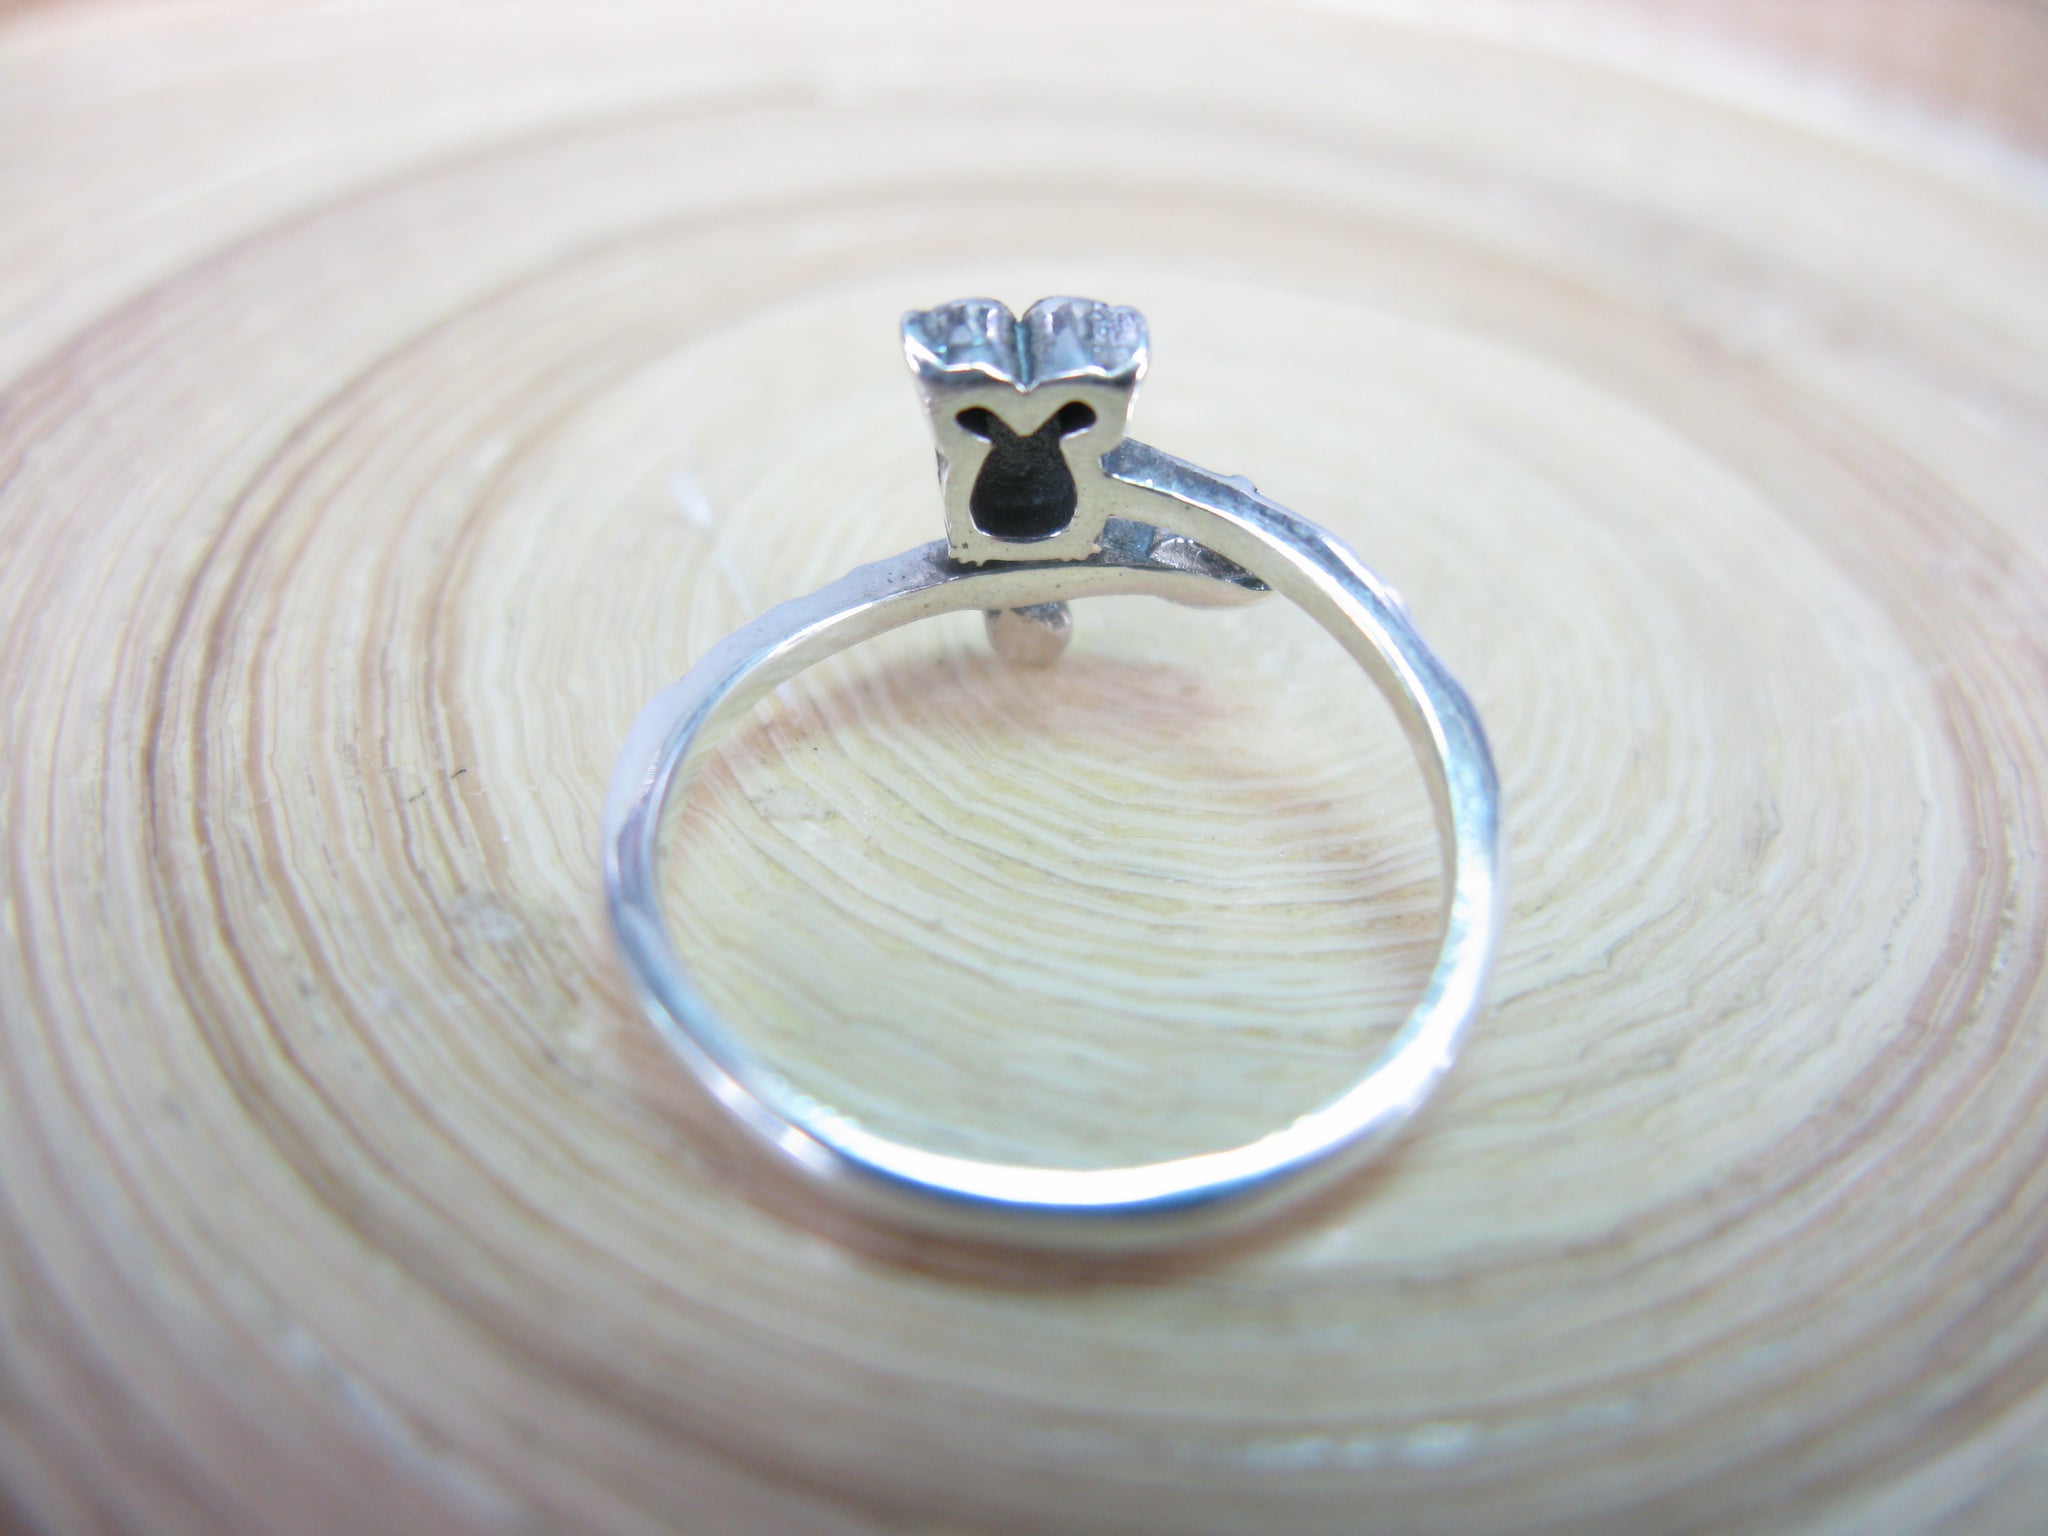 Owl Ring in 925 Sterling Silver